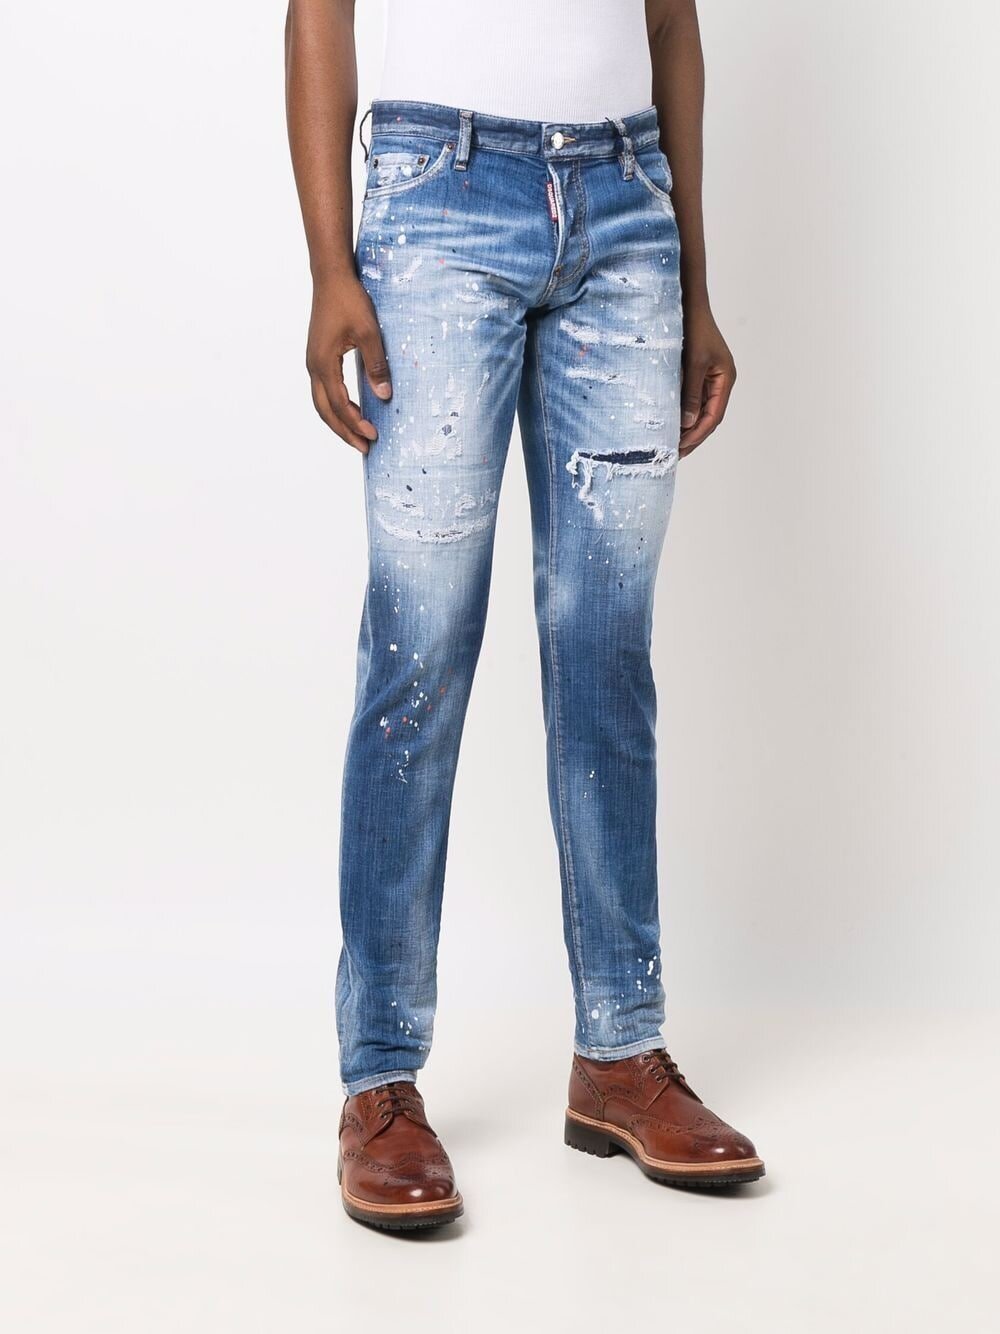 Dsquared2 Faded Paint-splattered Blue Jeans